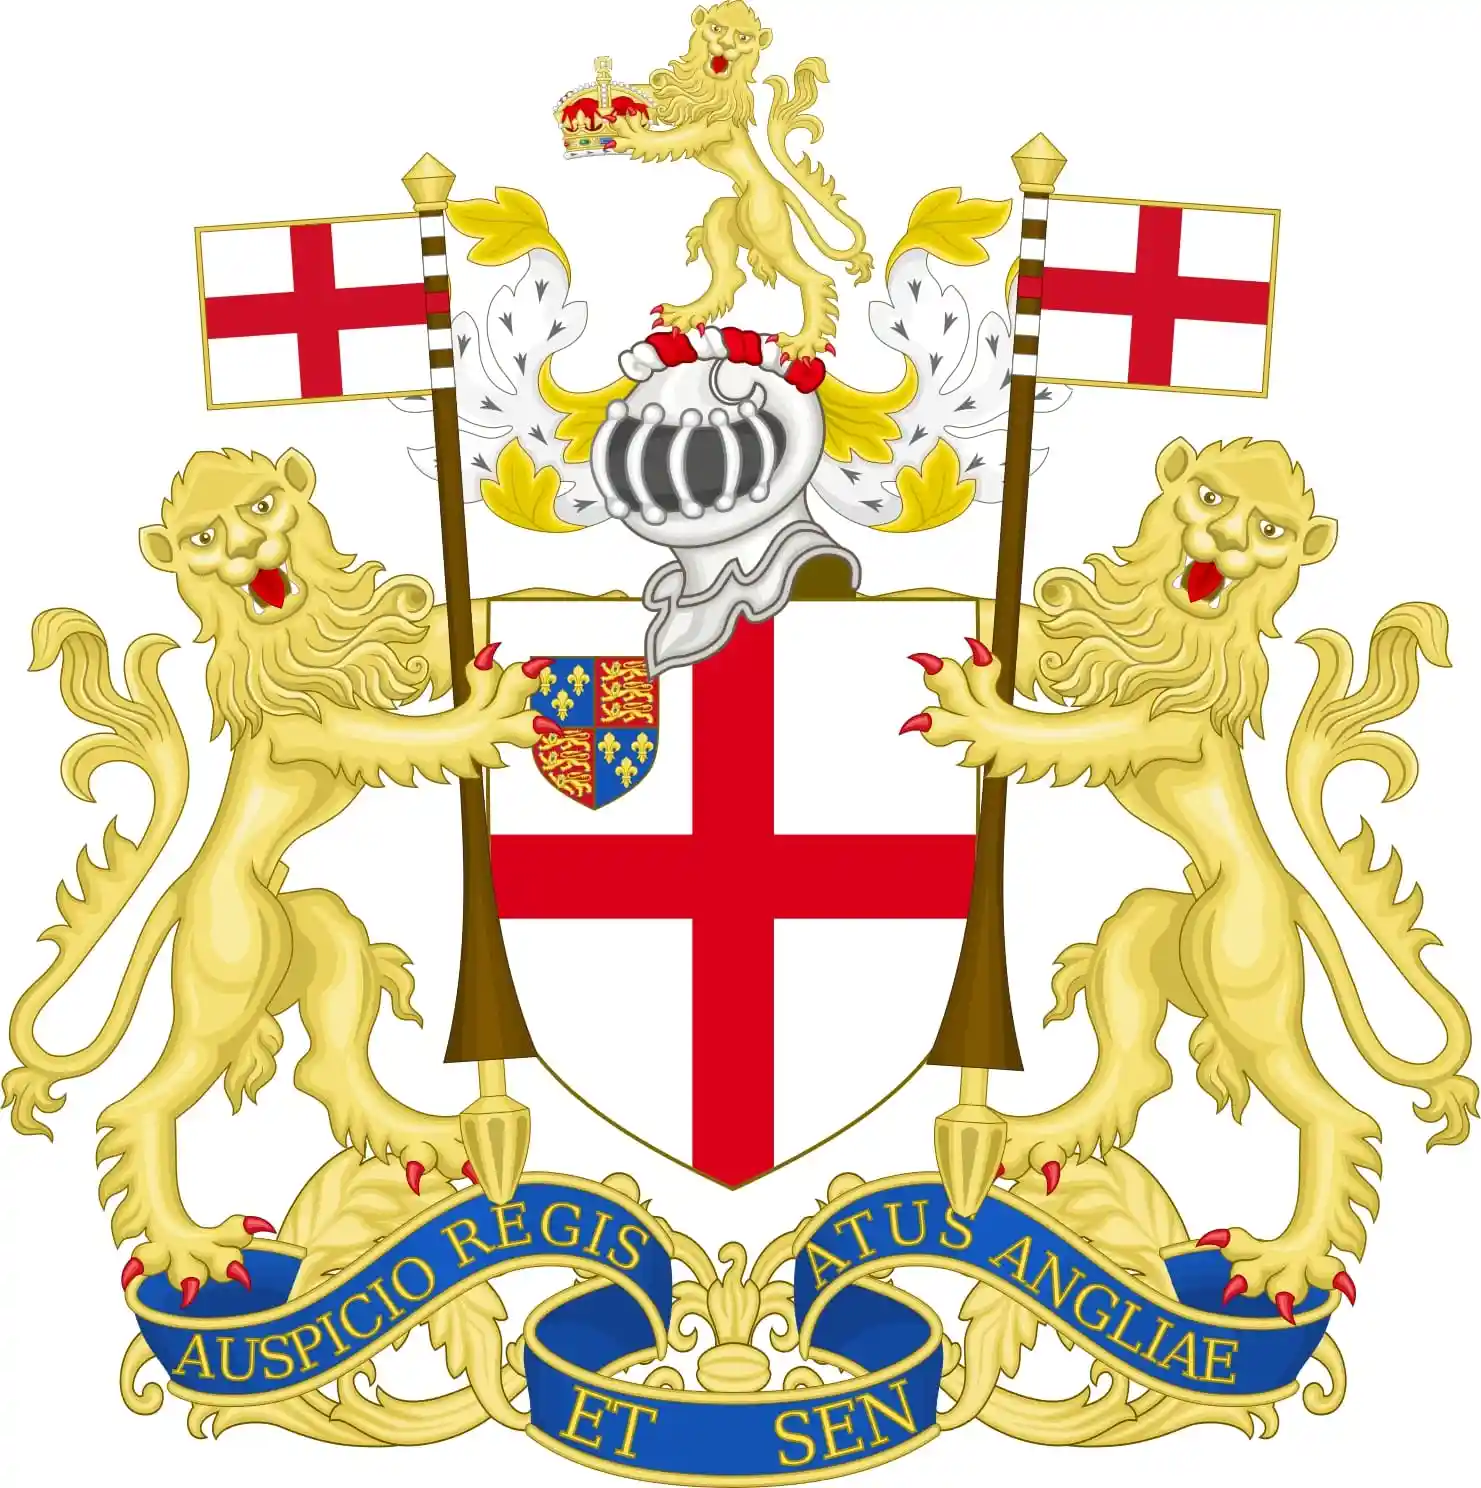 Coat of Arms of the English East India Company (1600-1709); Image Source: Wikimedia Commons